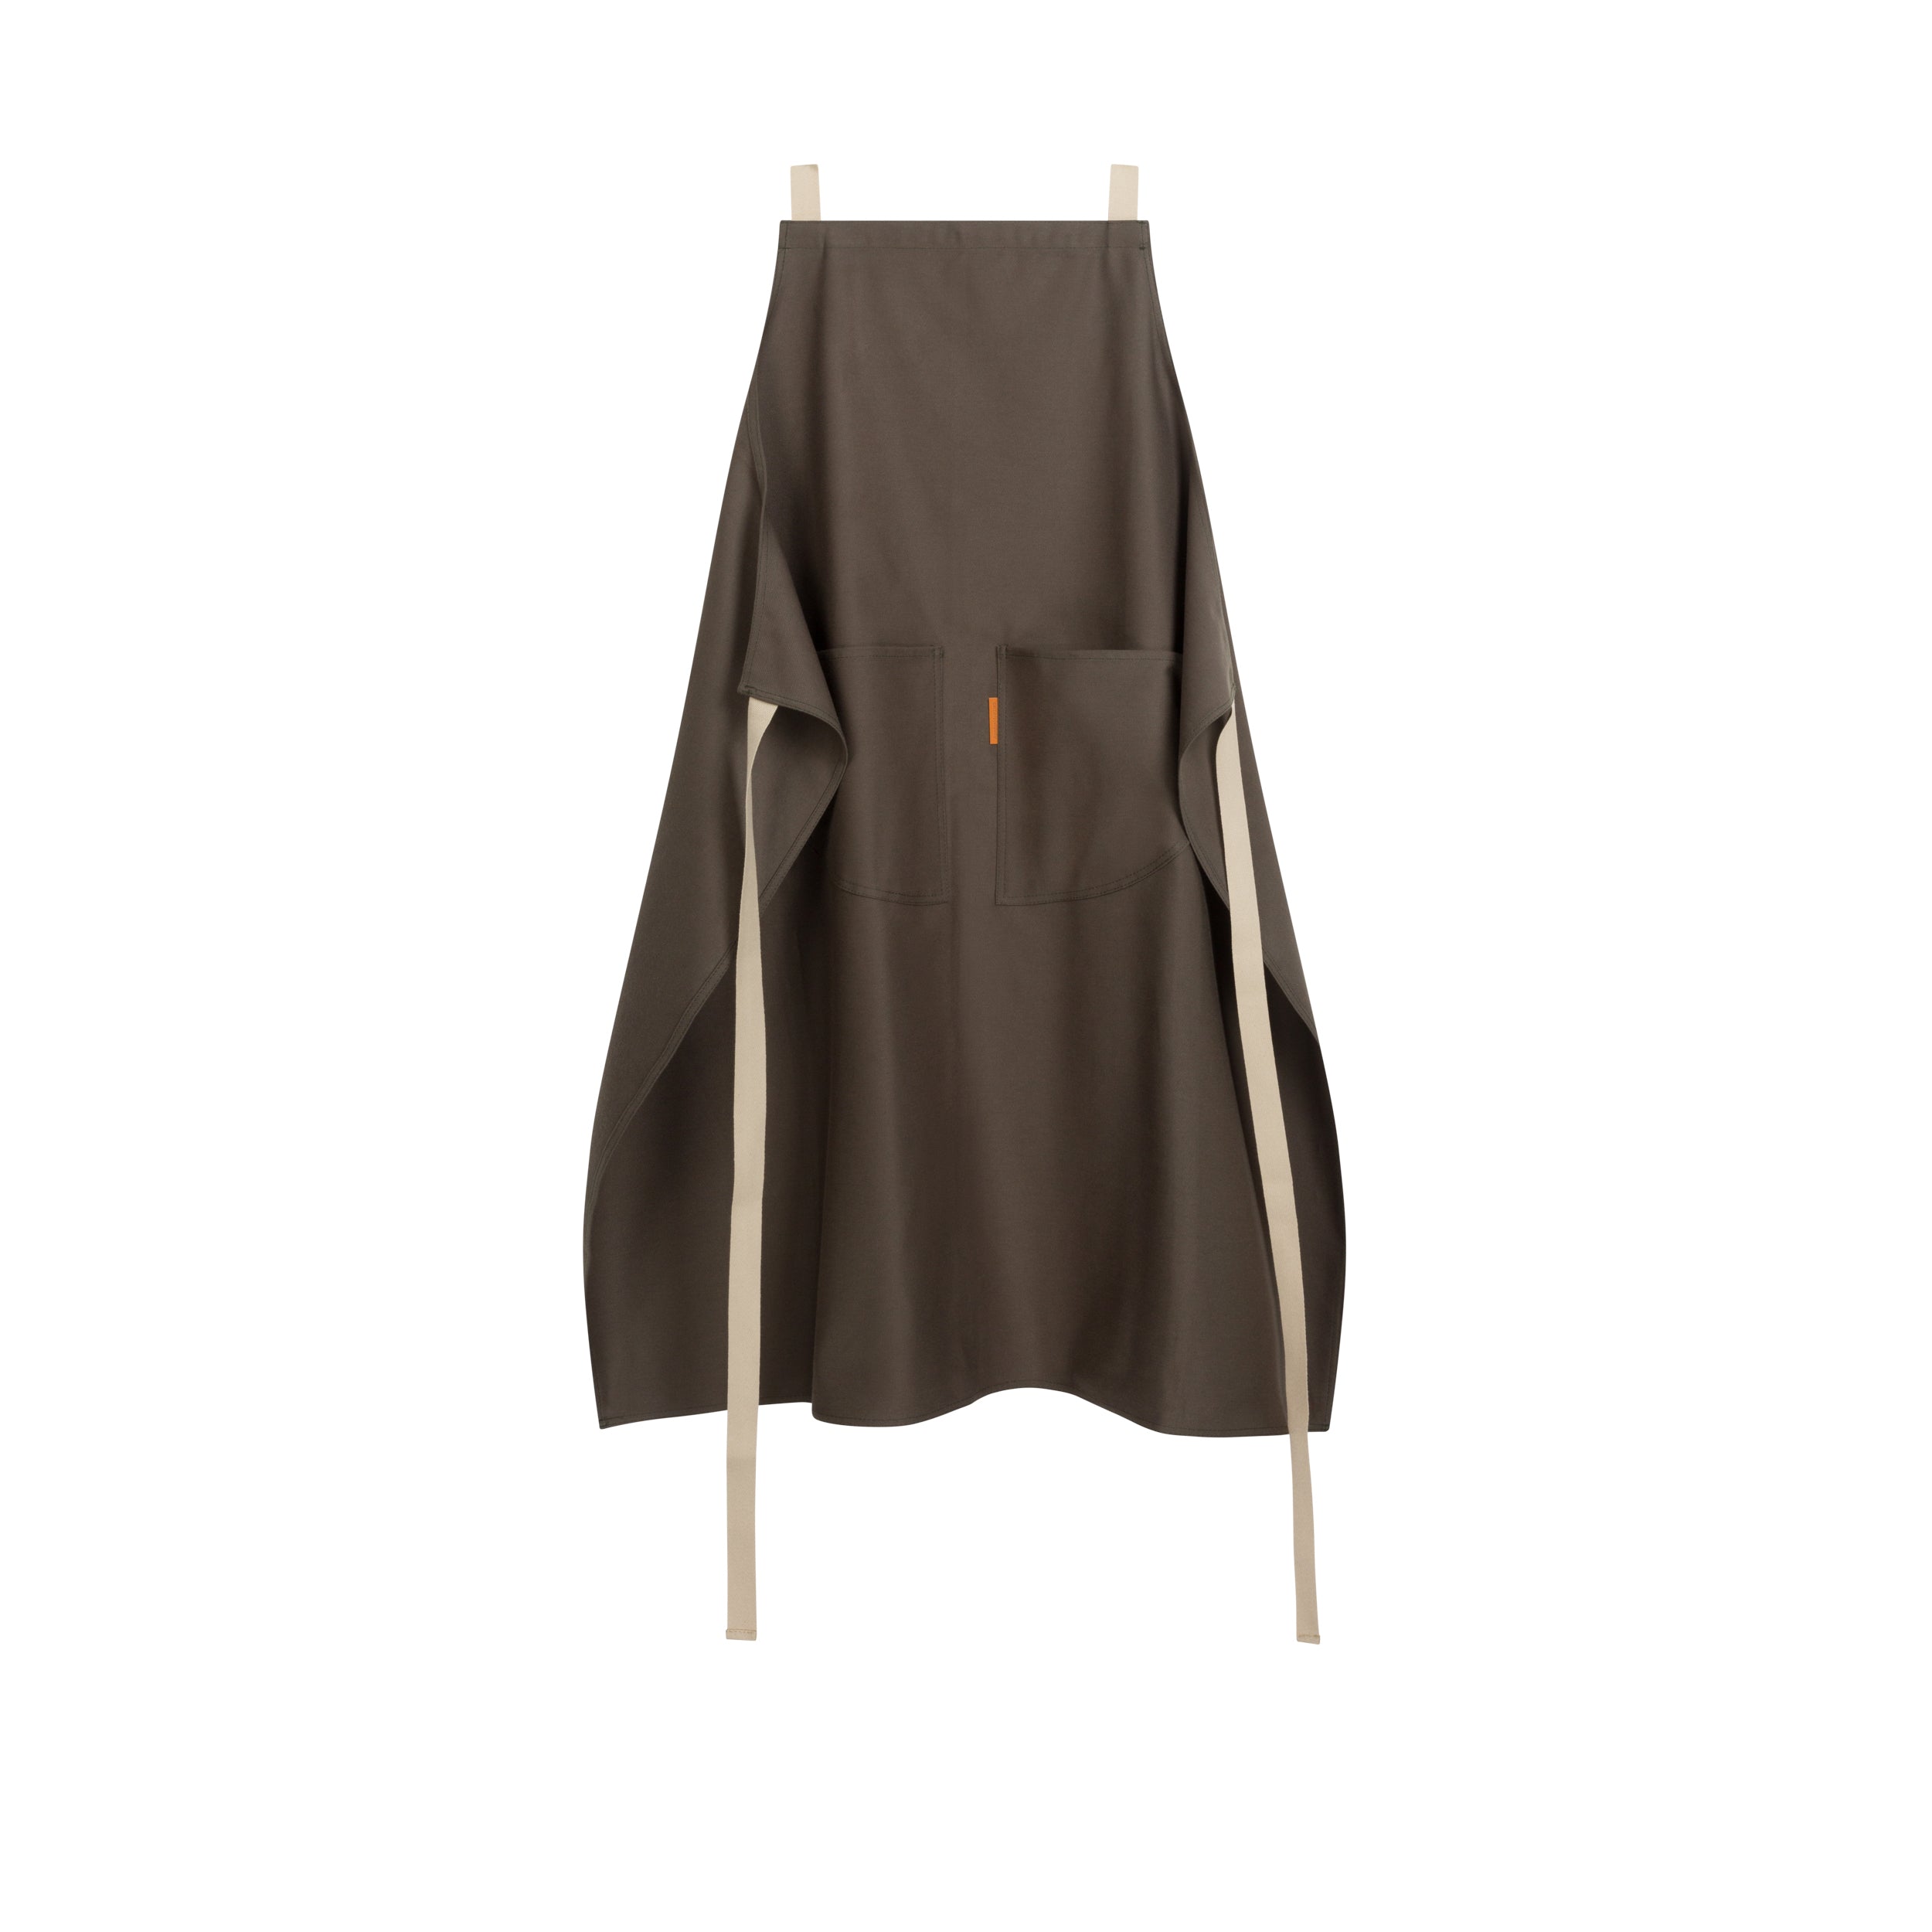 Carrier Company Long Apron in Olive